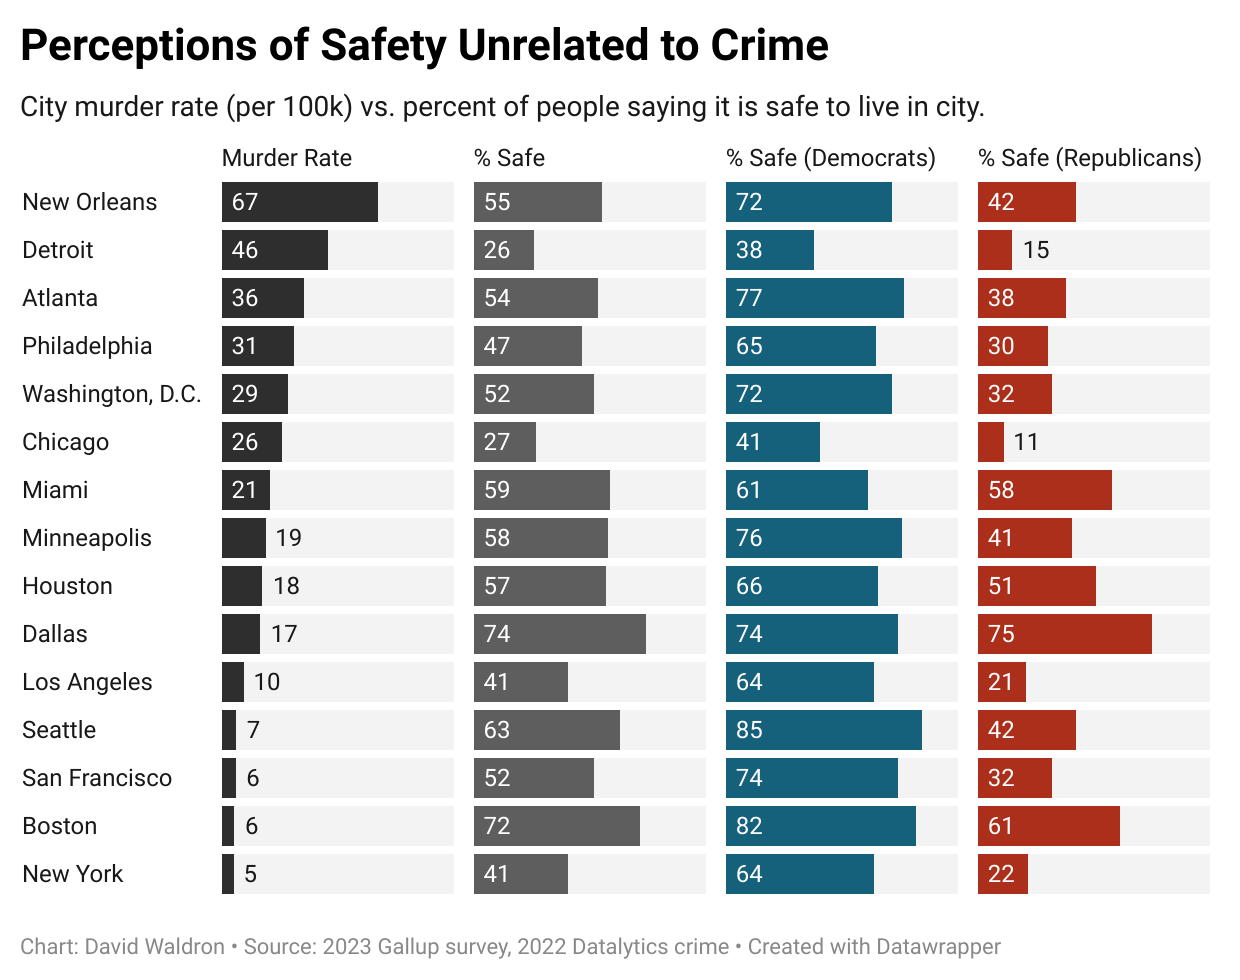 Bar chart showing murder rate by city, with additional columns of bars for the percent of people rating the city as safe to live in